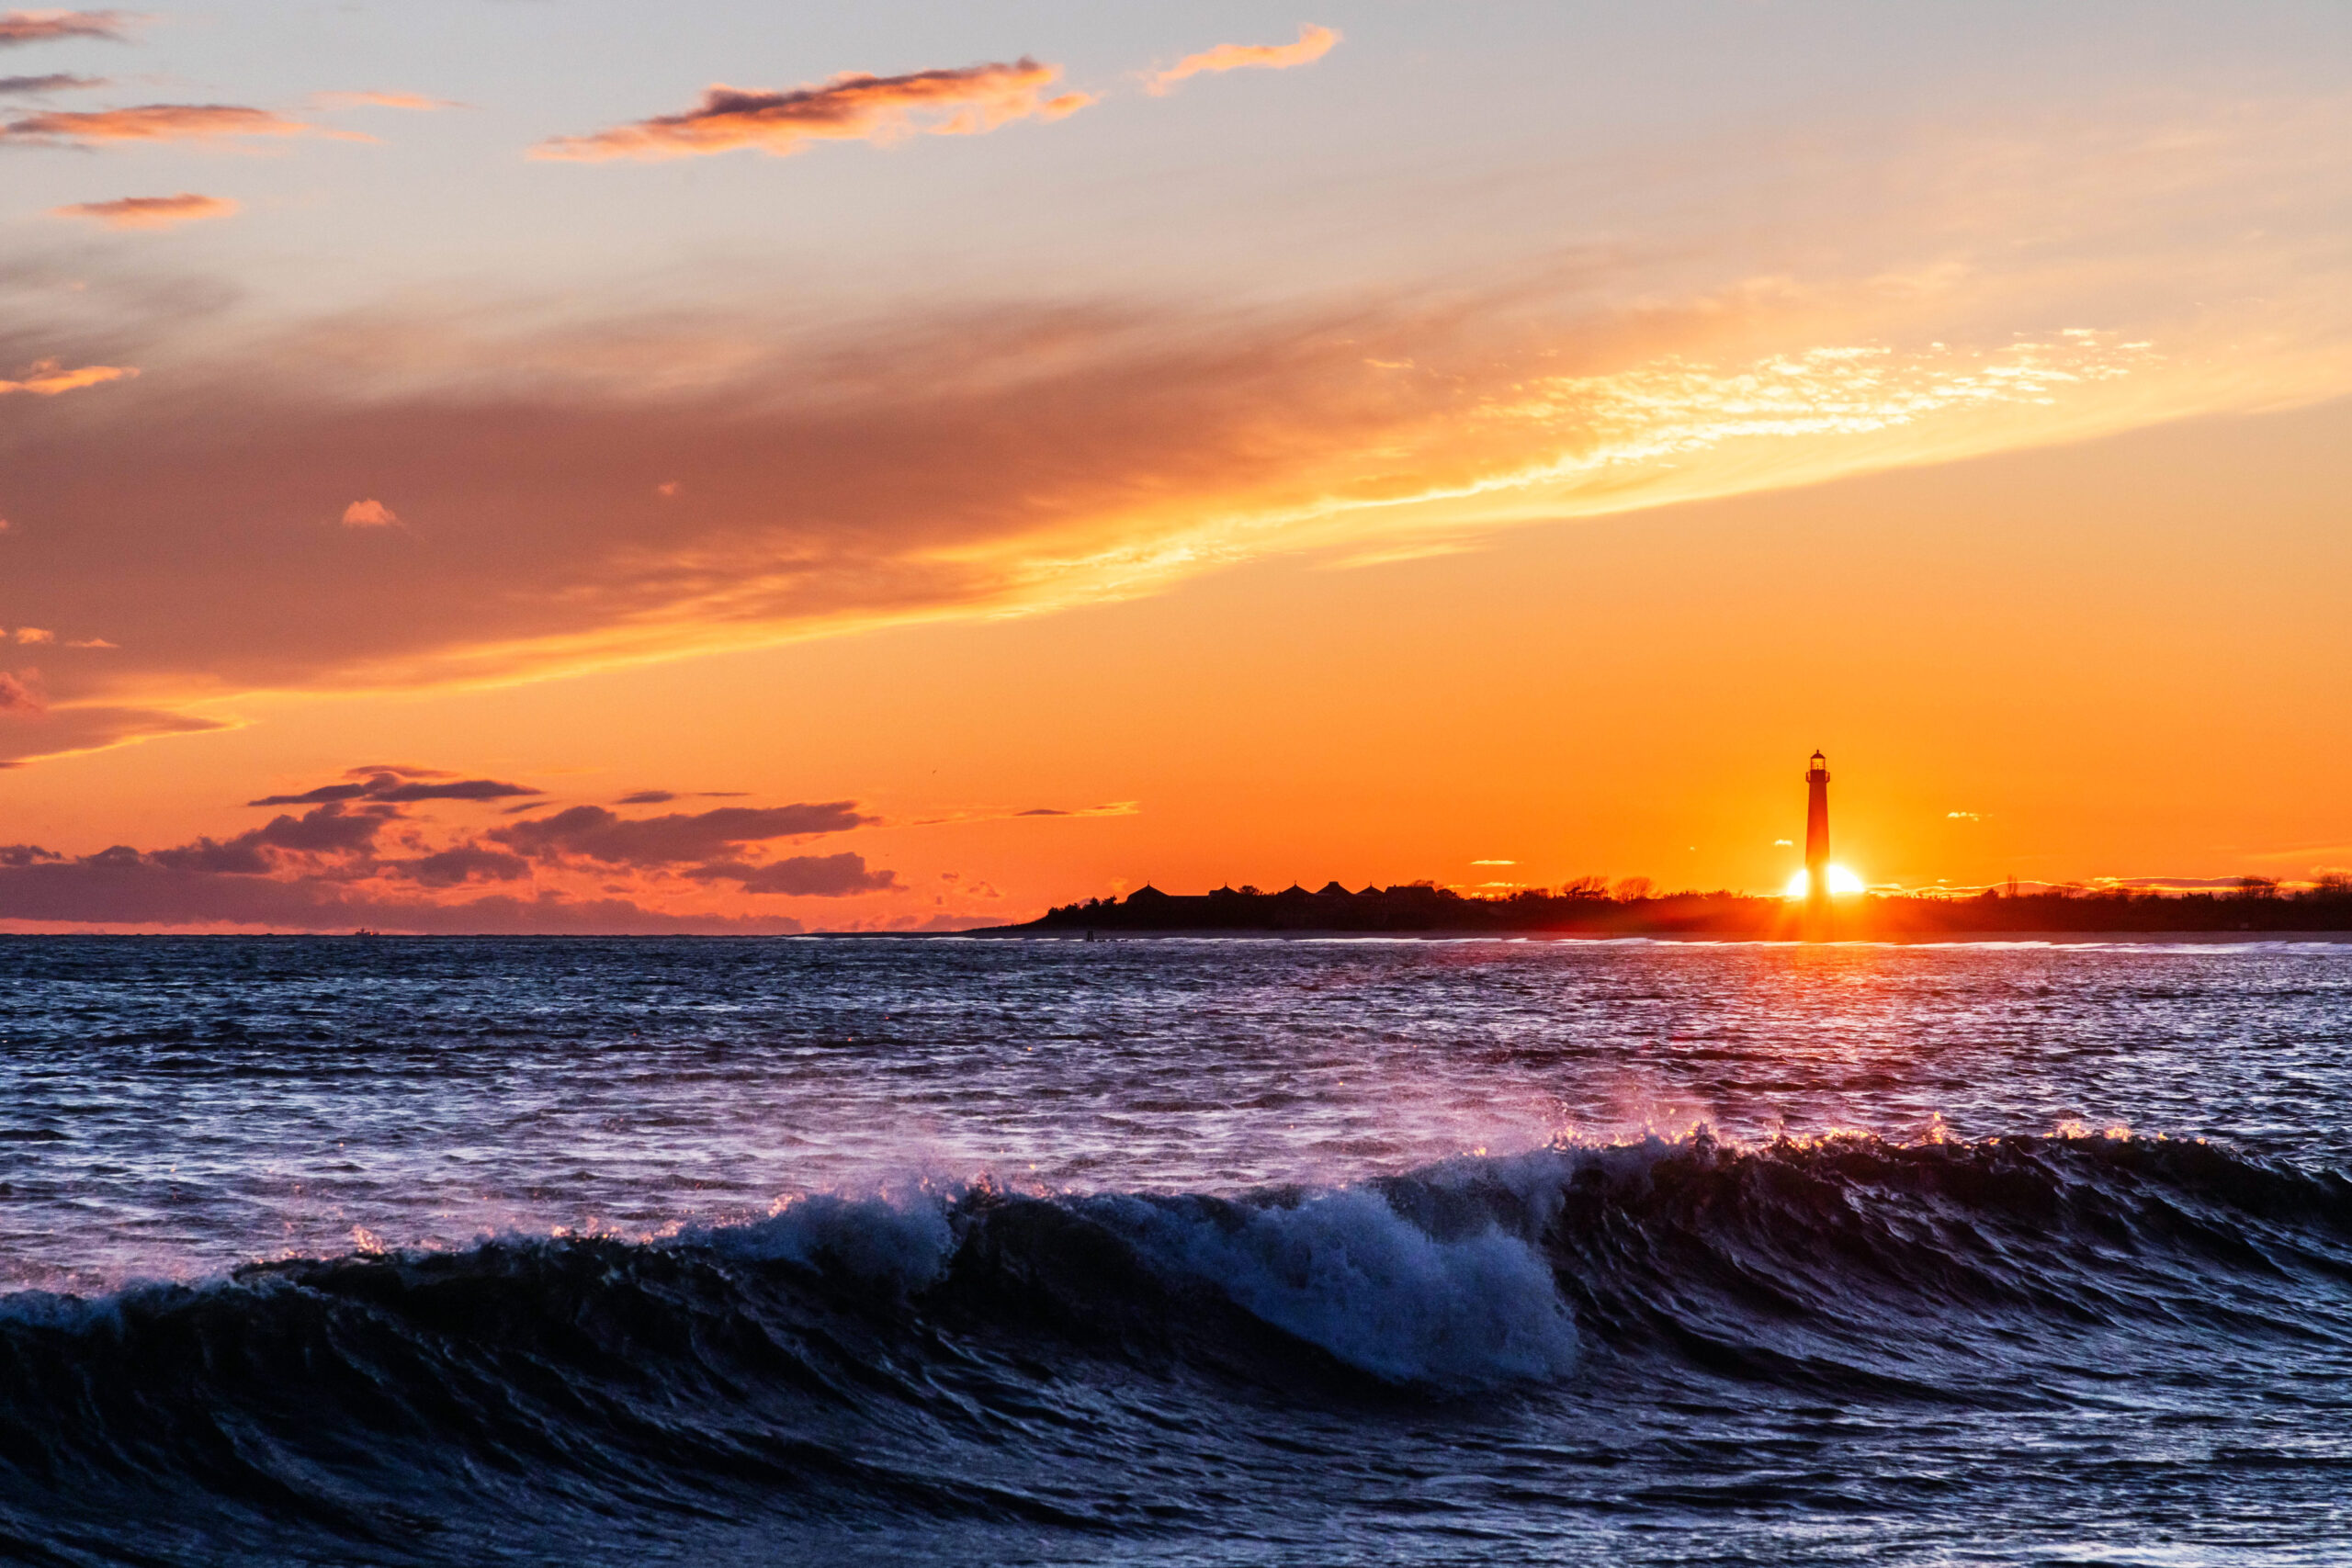 The sun setting directly behind the lighthouse with an orange sky and a wave crashing in the ocean